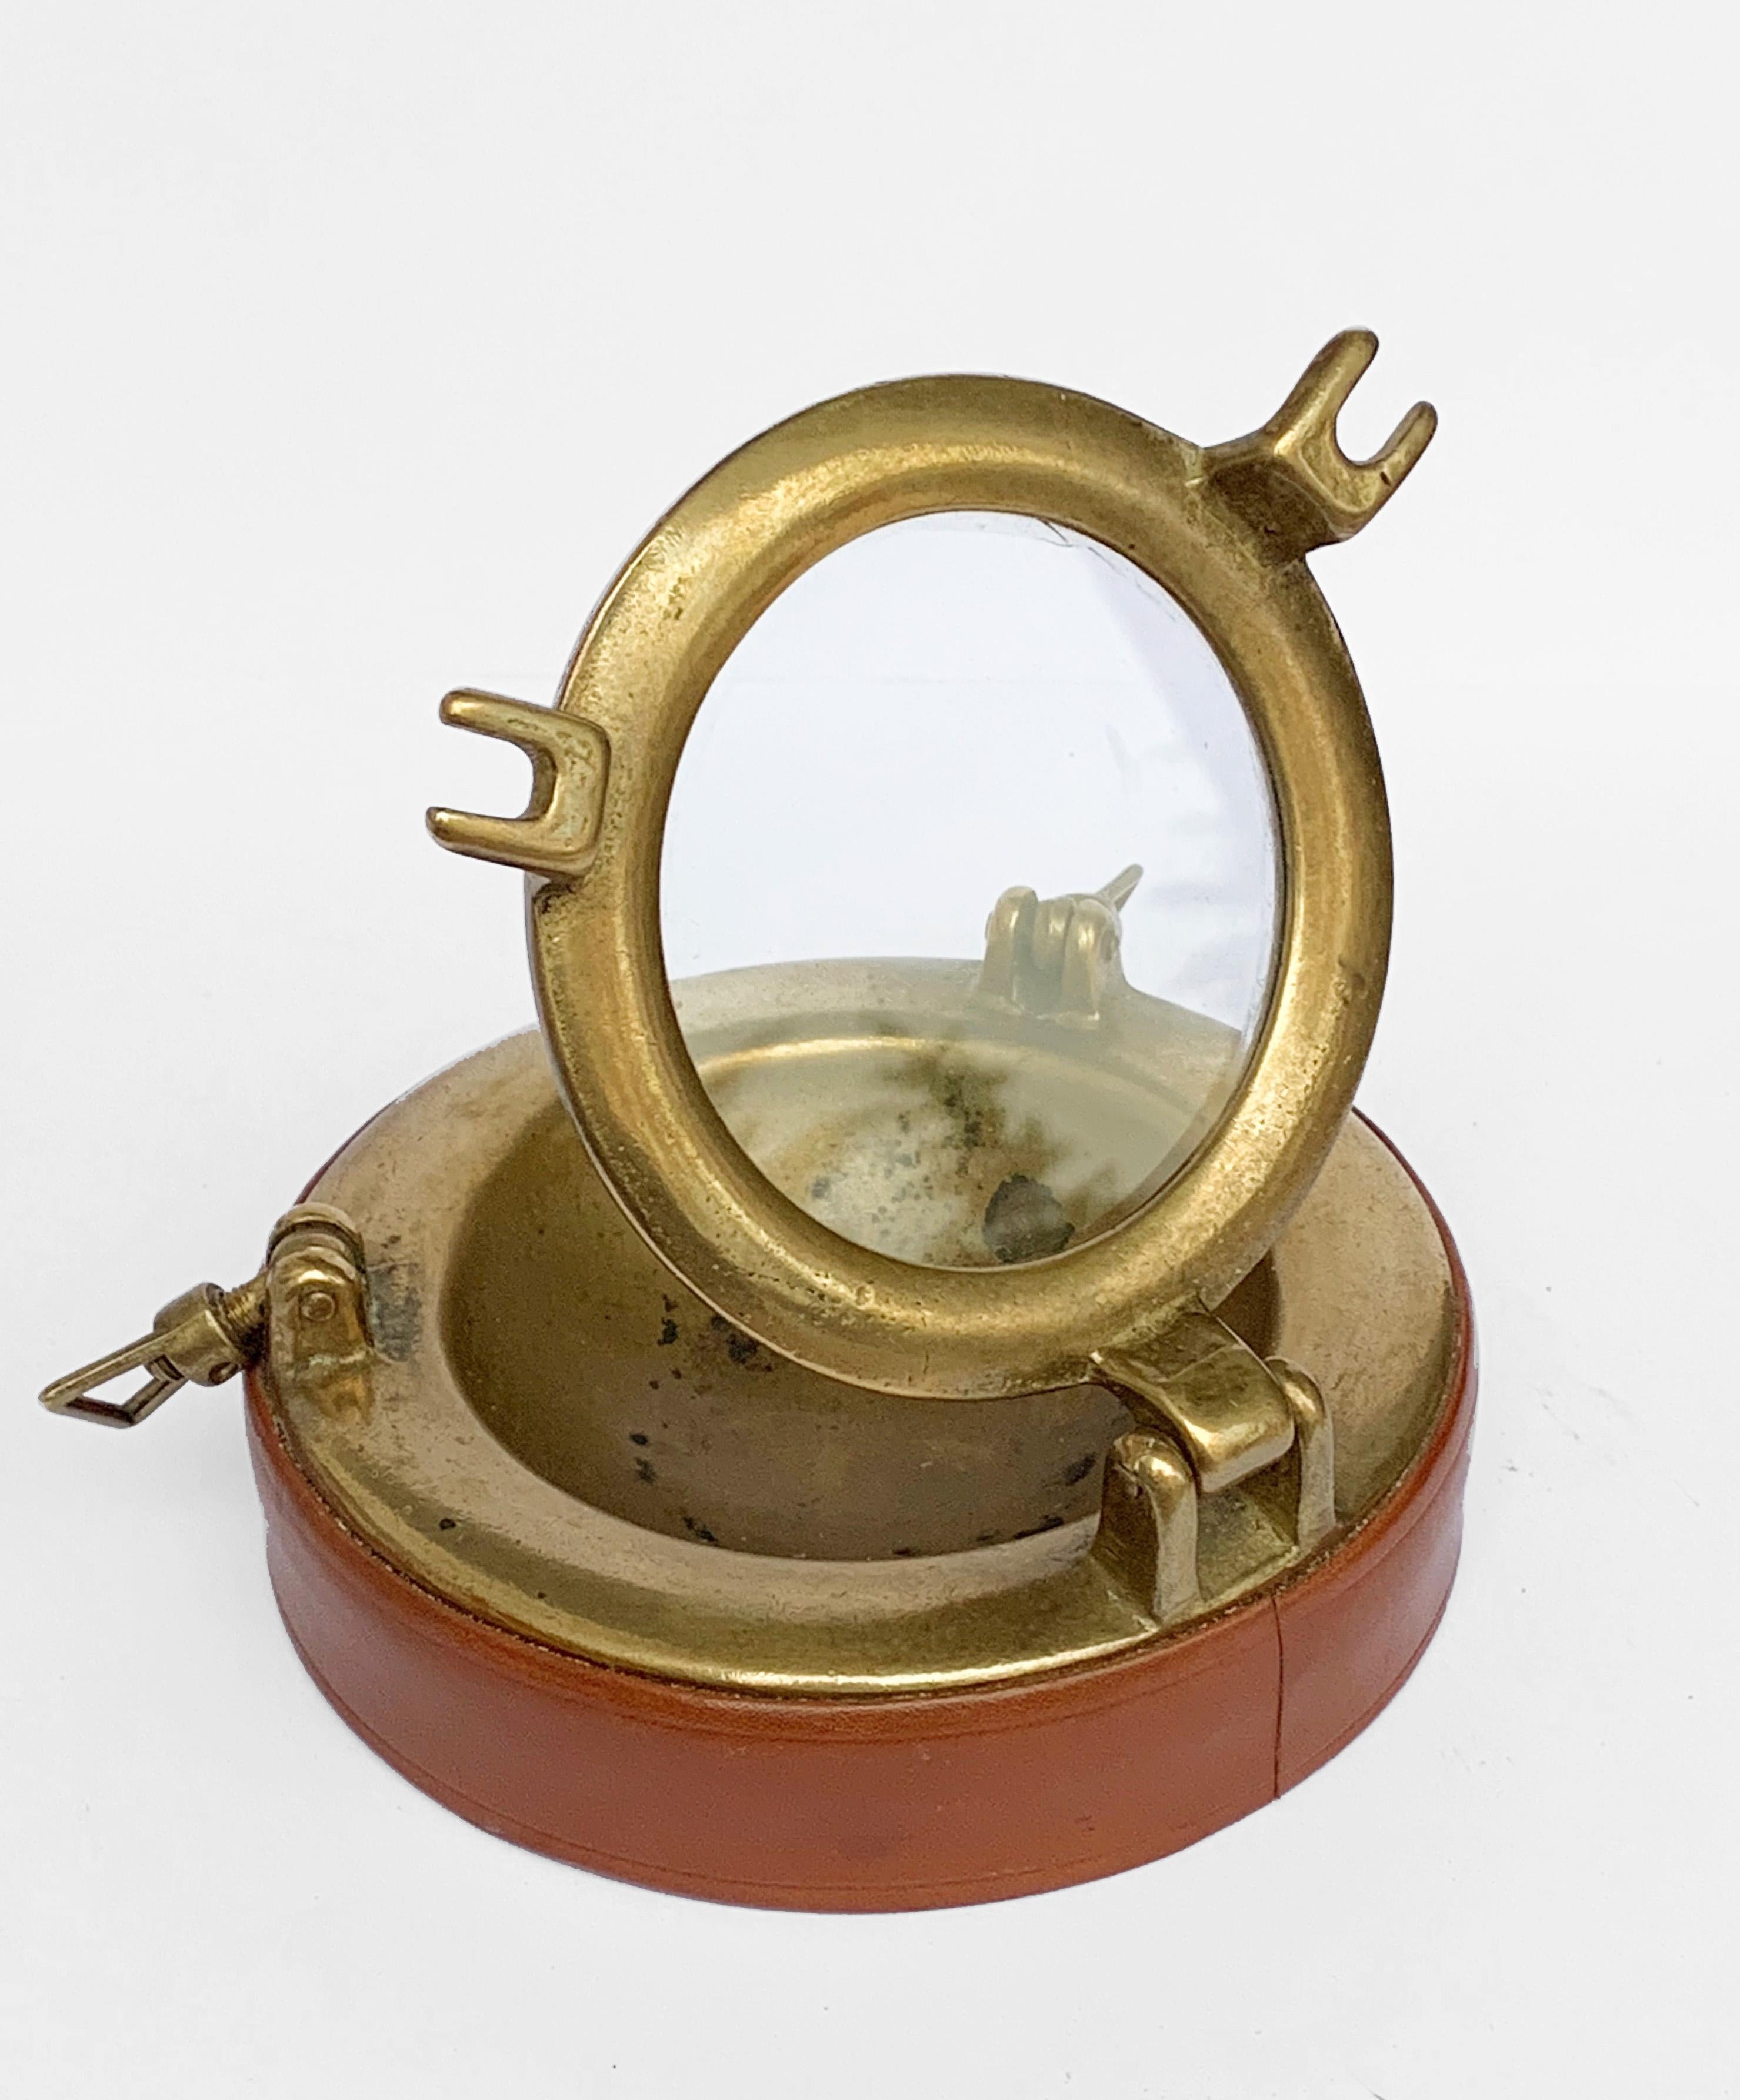 Ashtray in brass and leather, 1960s Designed by Gucci, Italy 1960s
Ashtray in brass, leather and glass, porthole shape of the ship, with a top that can be opened. Italian 1960s. Designed by Gucci.